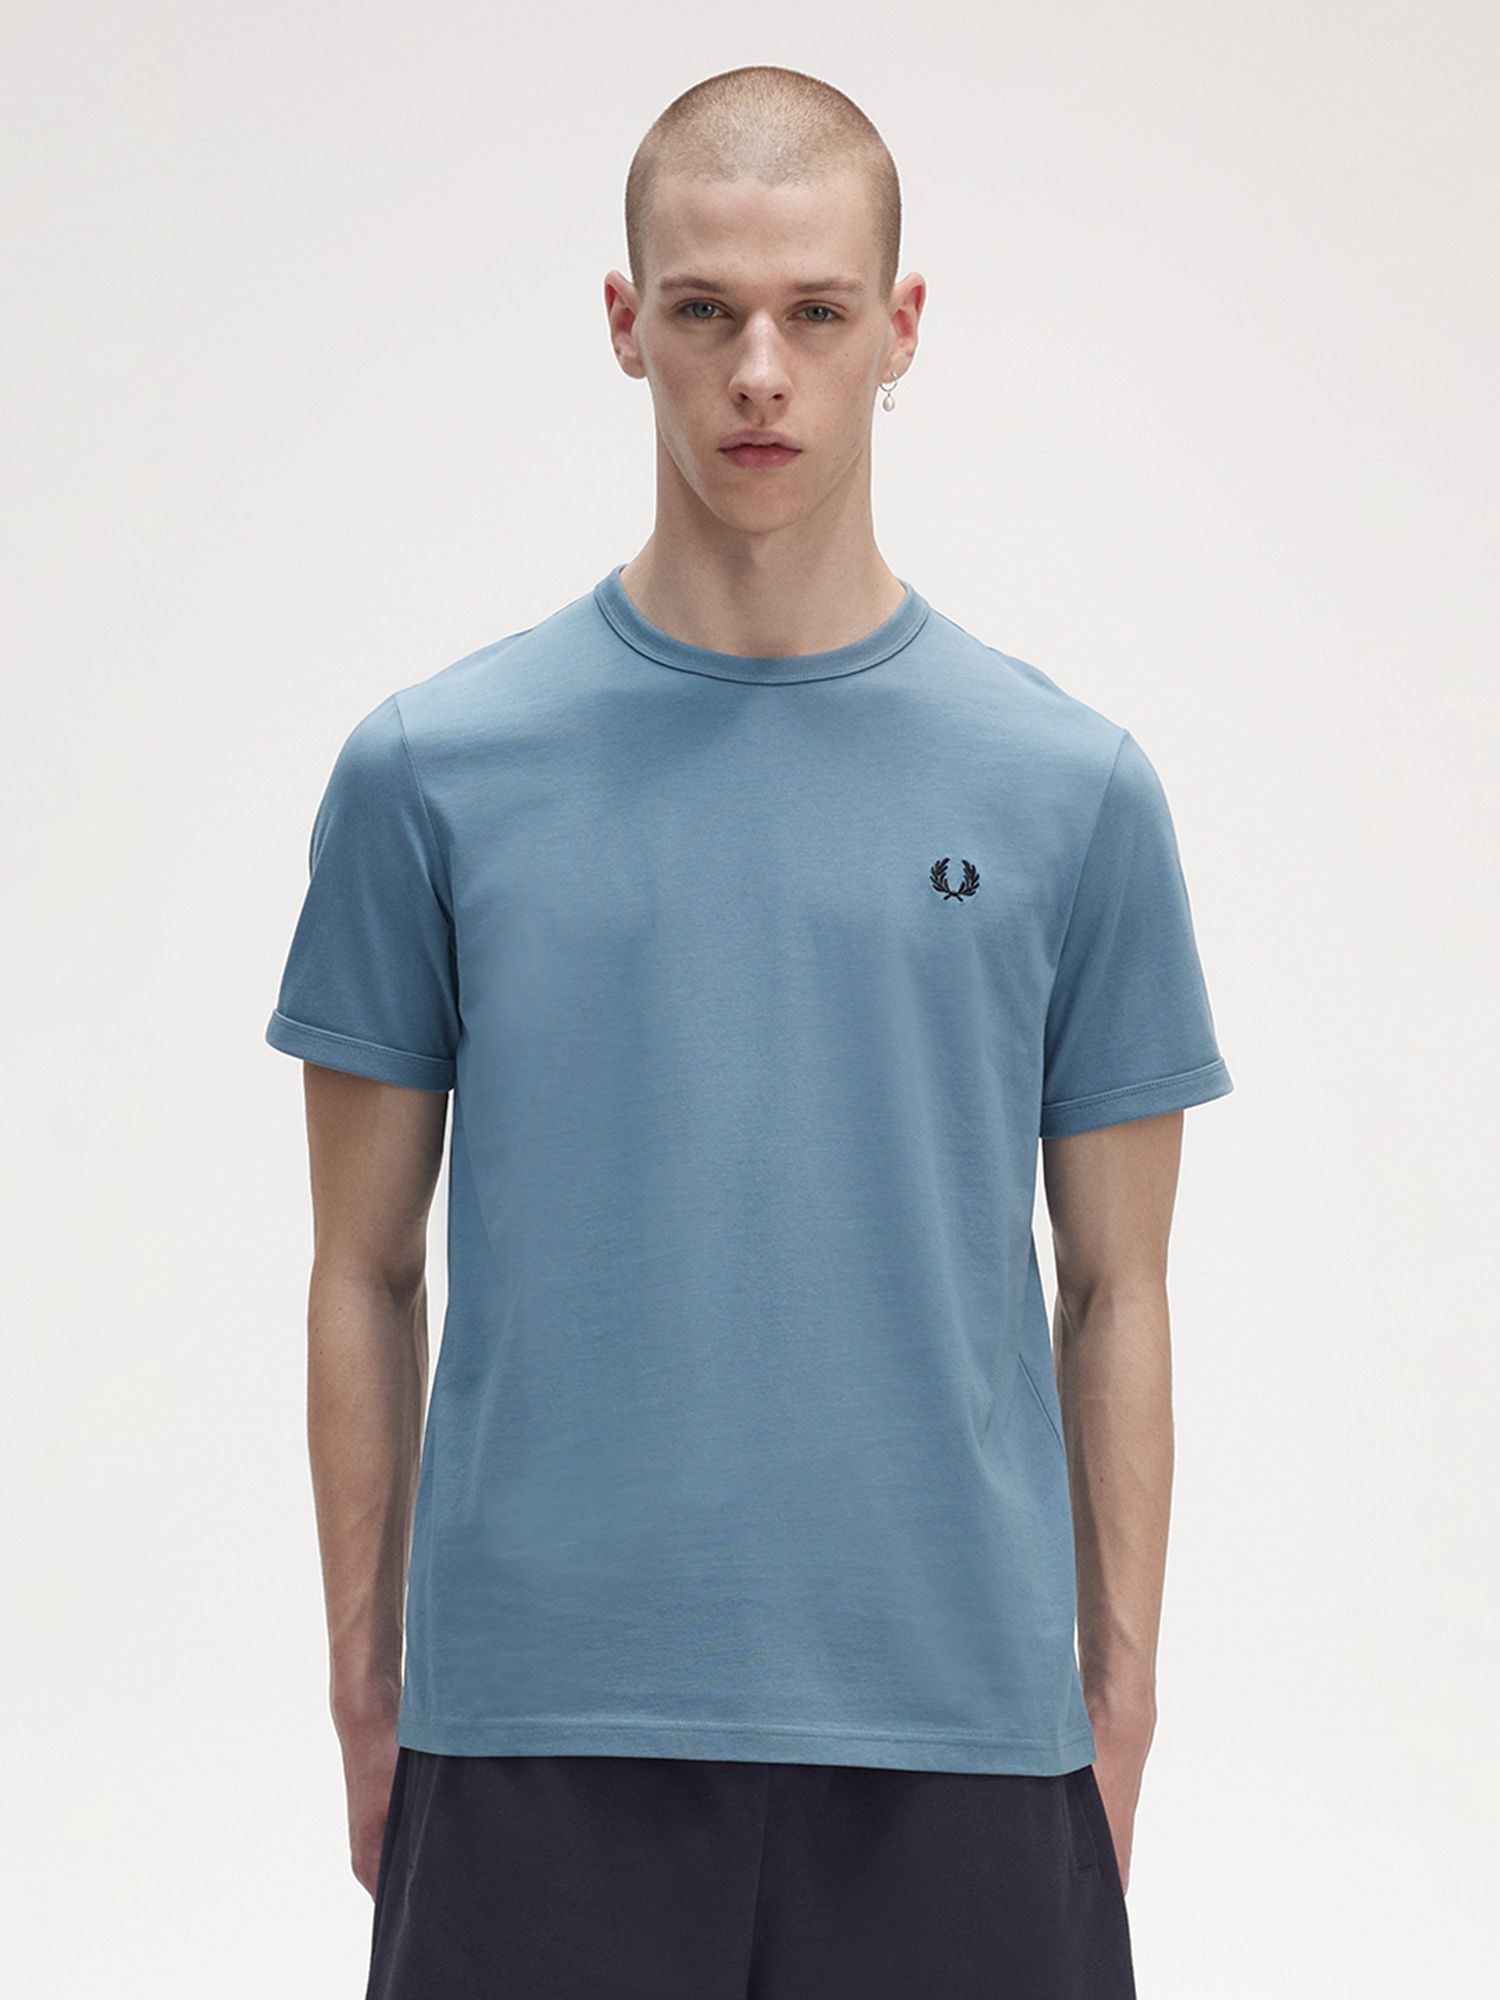 Fred Perry Ringer T-Shirt, Ash Blue, S